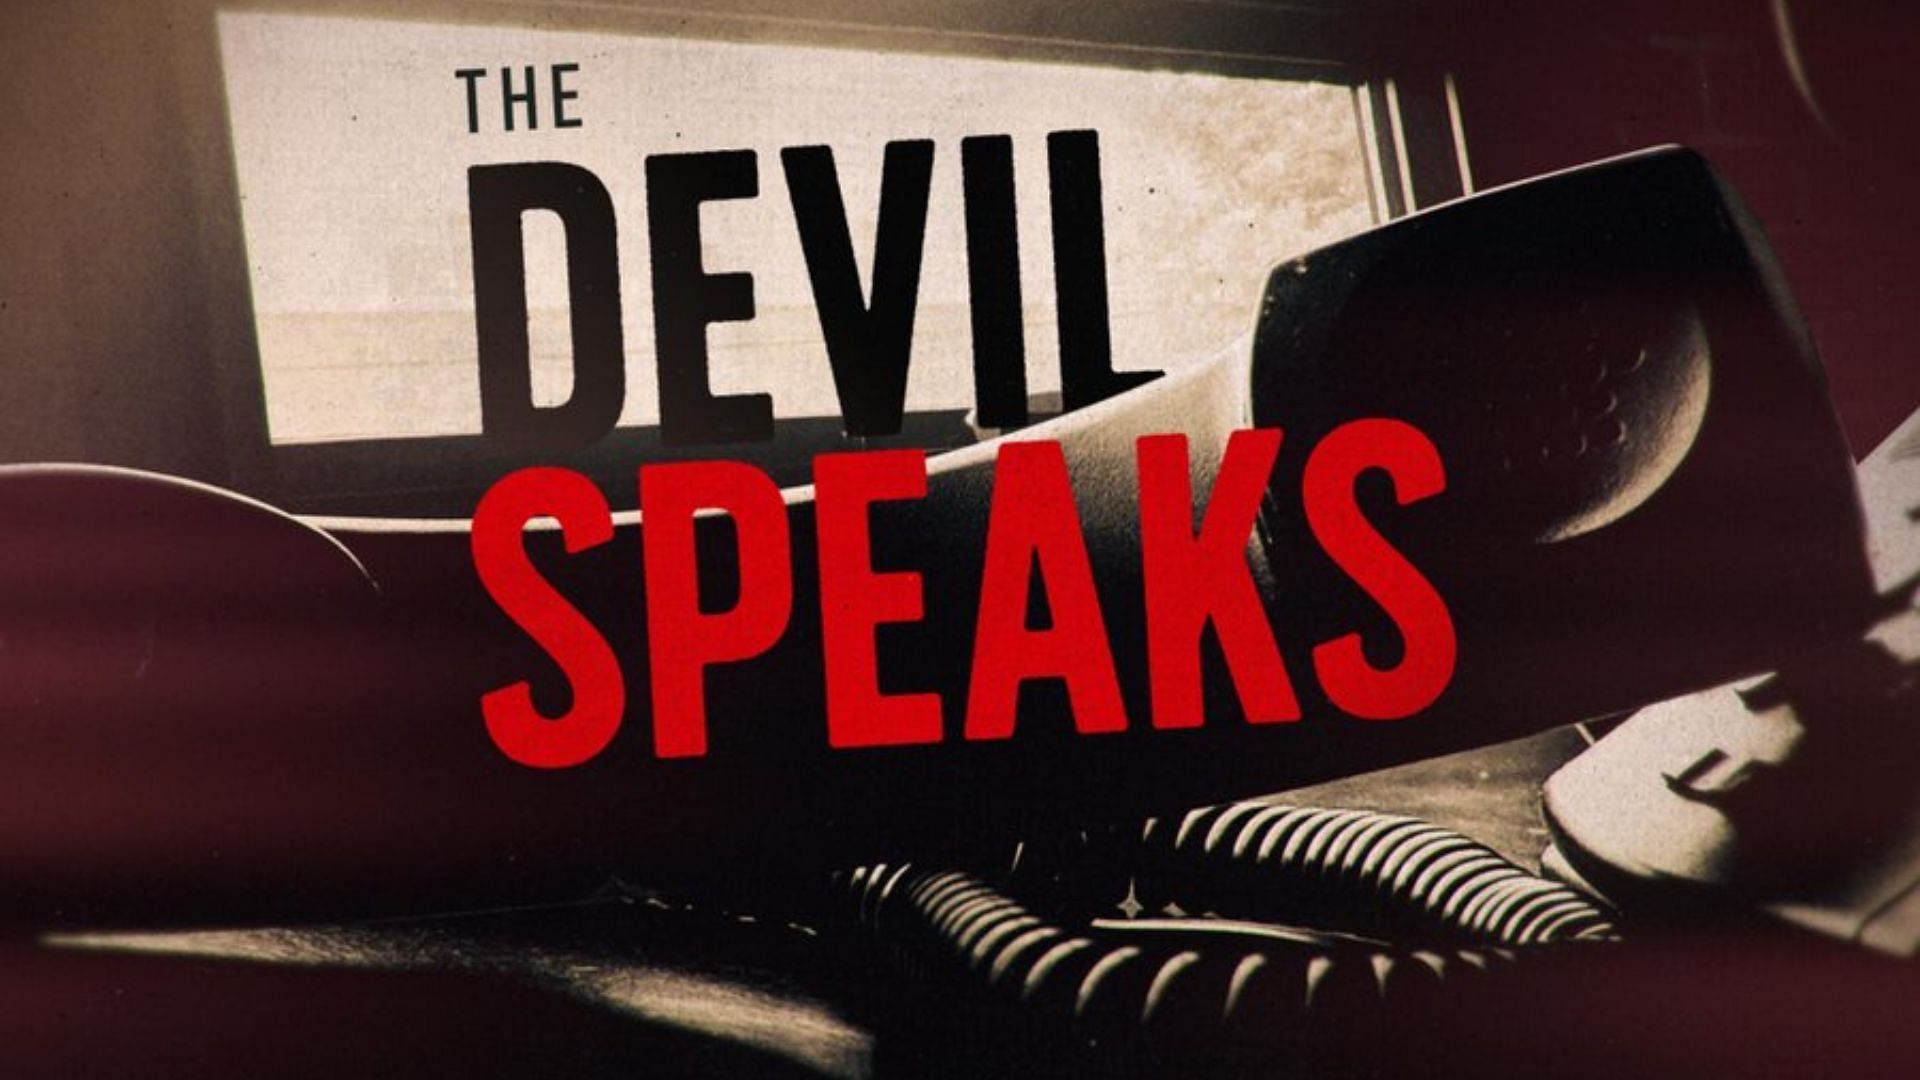 A poster for The Devil Speaks (image via Investigation Discovery/Twitter)